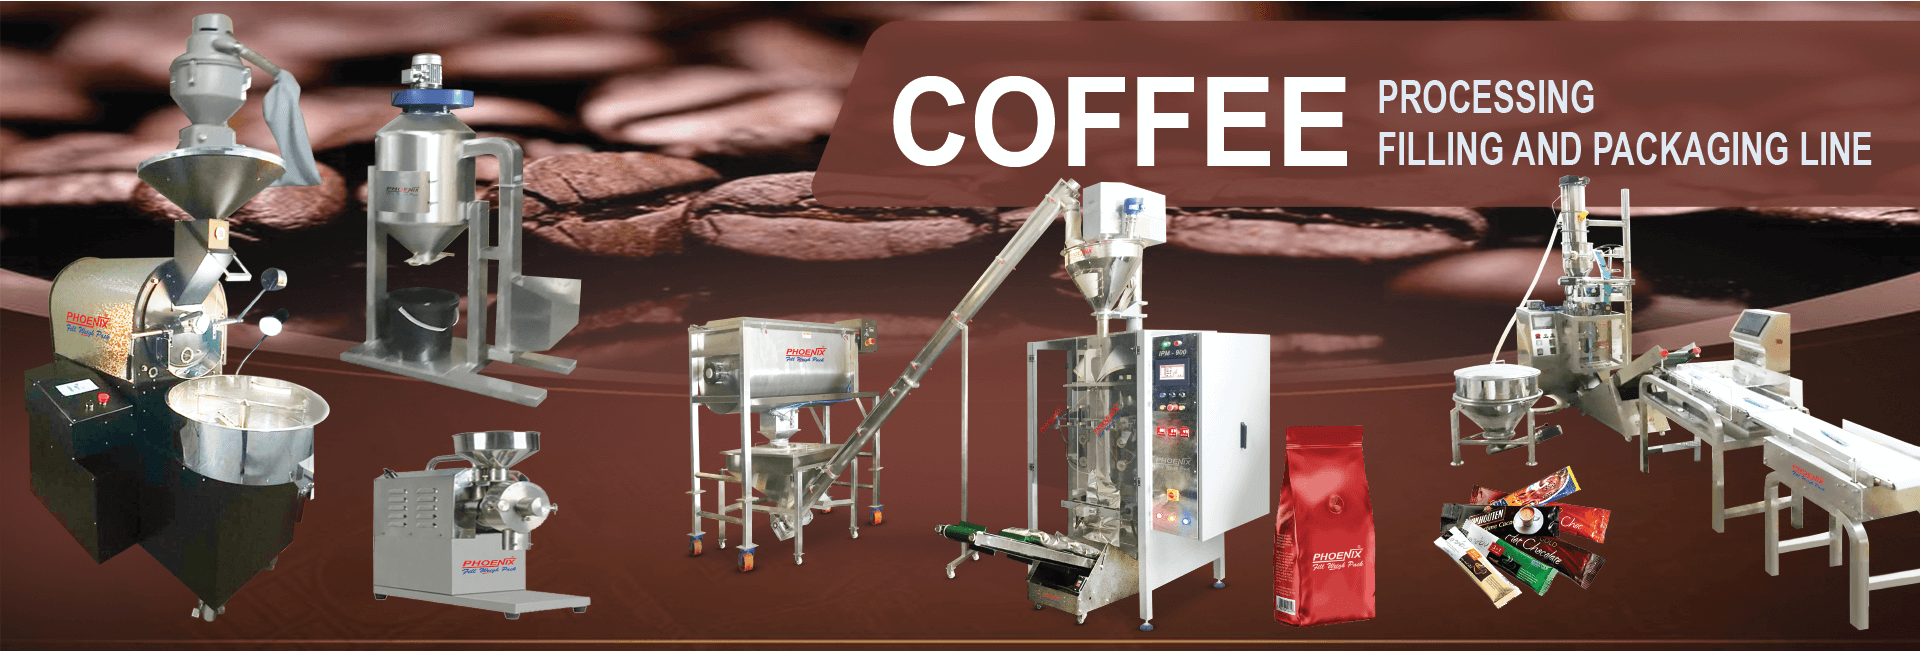 Coffee Processing and Packing Line